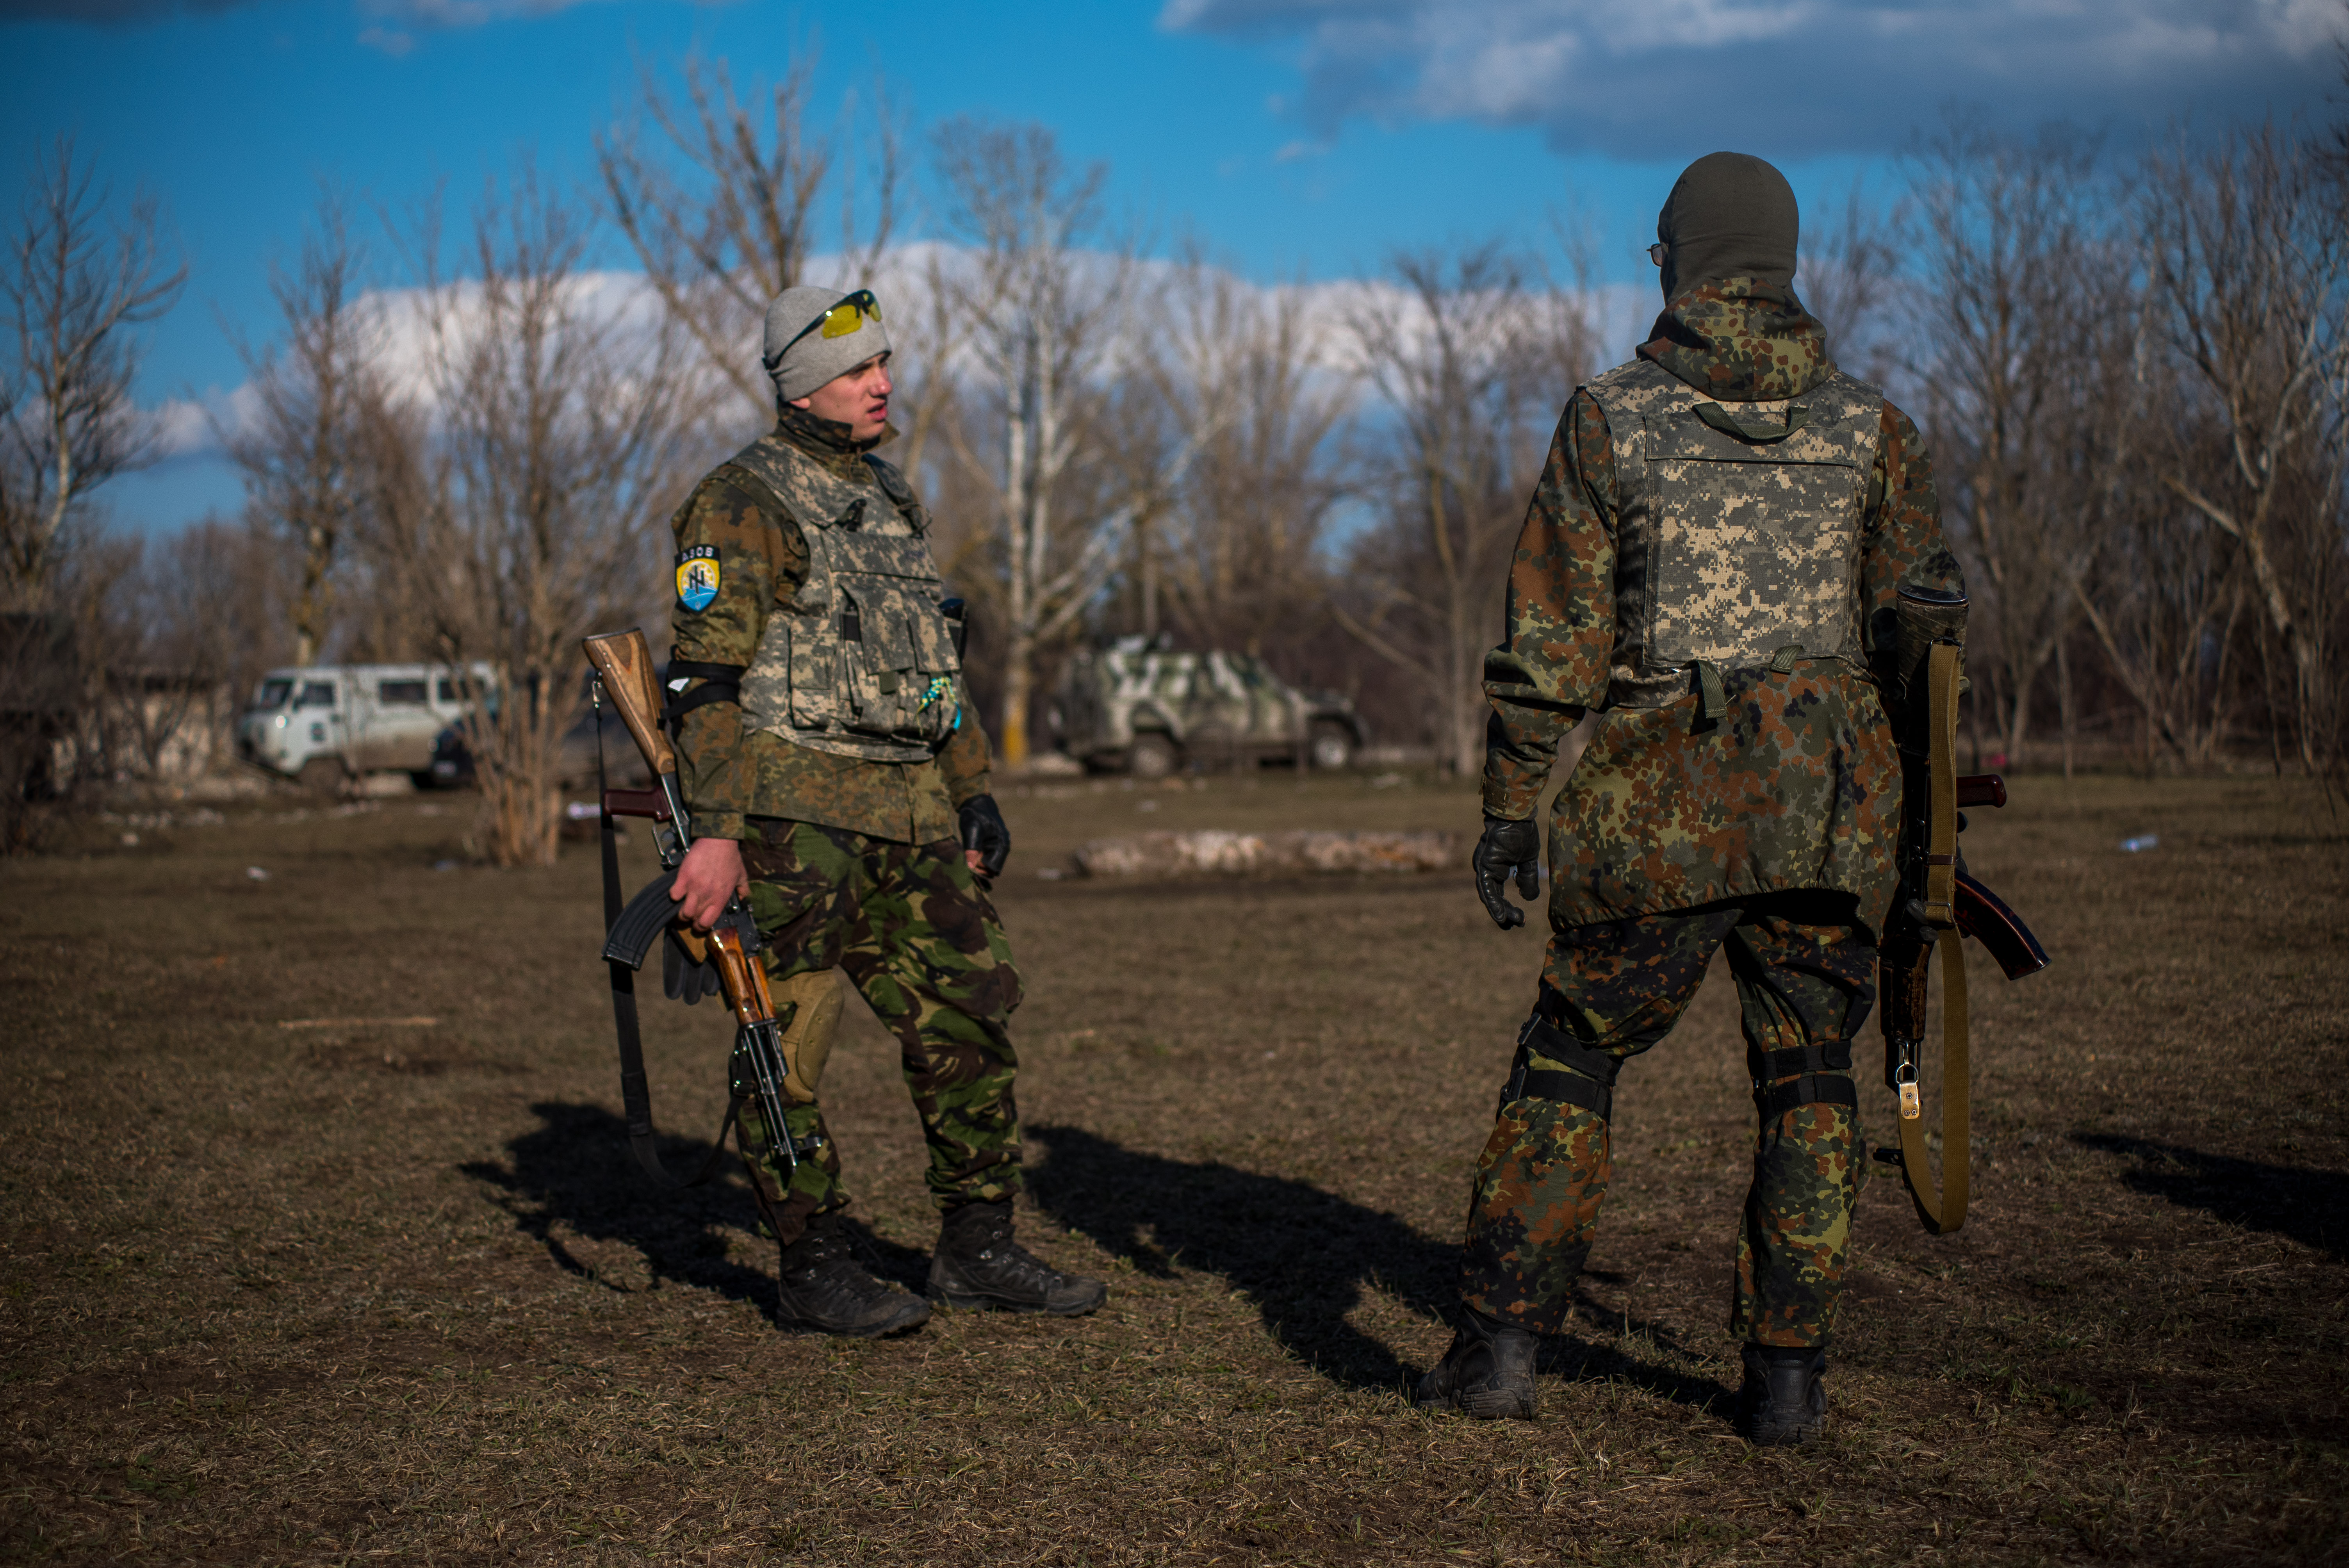 3/6: Members of the Azov Battalion take a break from a training exercise near Mariupol. Note the battalion’s Runic symbol on the arm of the fighter on the left. (Photo Credit: James Sprankle)